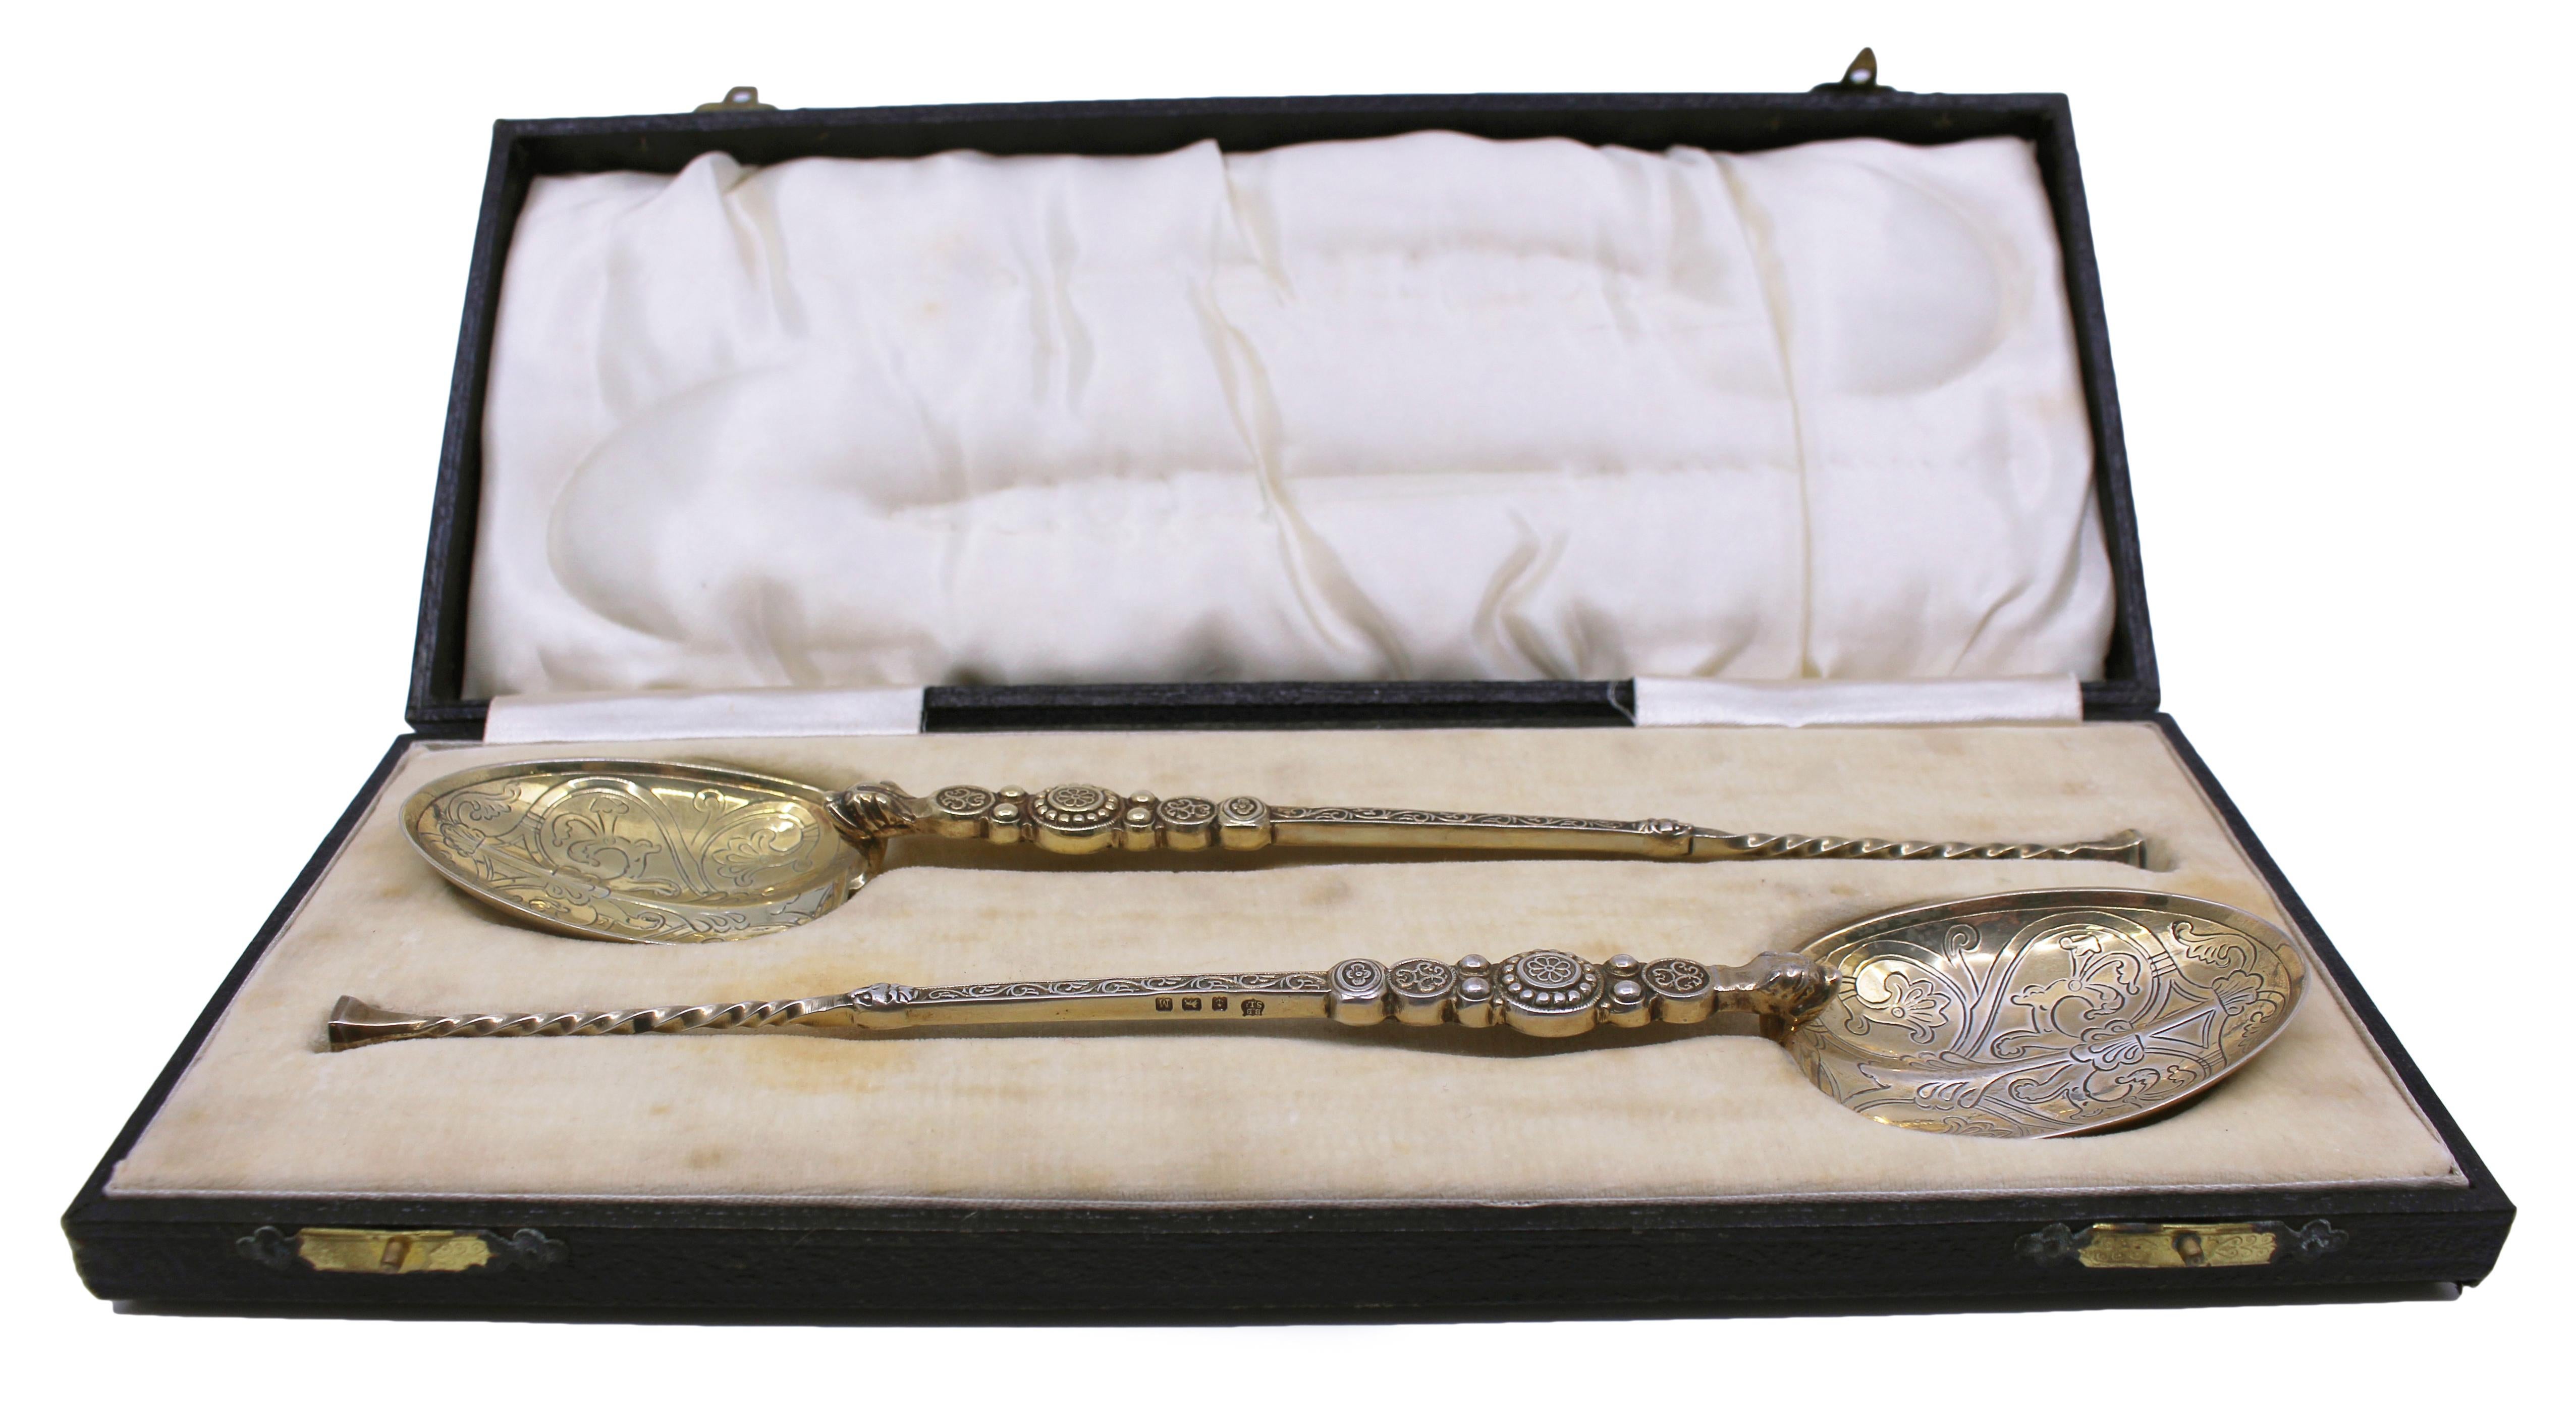 Pair of cased silver gilt anointing spoons Birmingham 1936


Period Early 20th c., English, dated 1936

Manufacturer Barker Brothers Silver Ltd, Birmingham

Composition silver gilt, fully hallmarked

Measures: Length 25.5 cm / 10